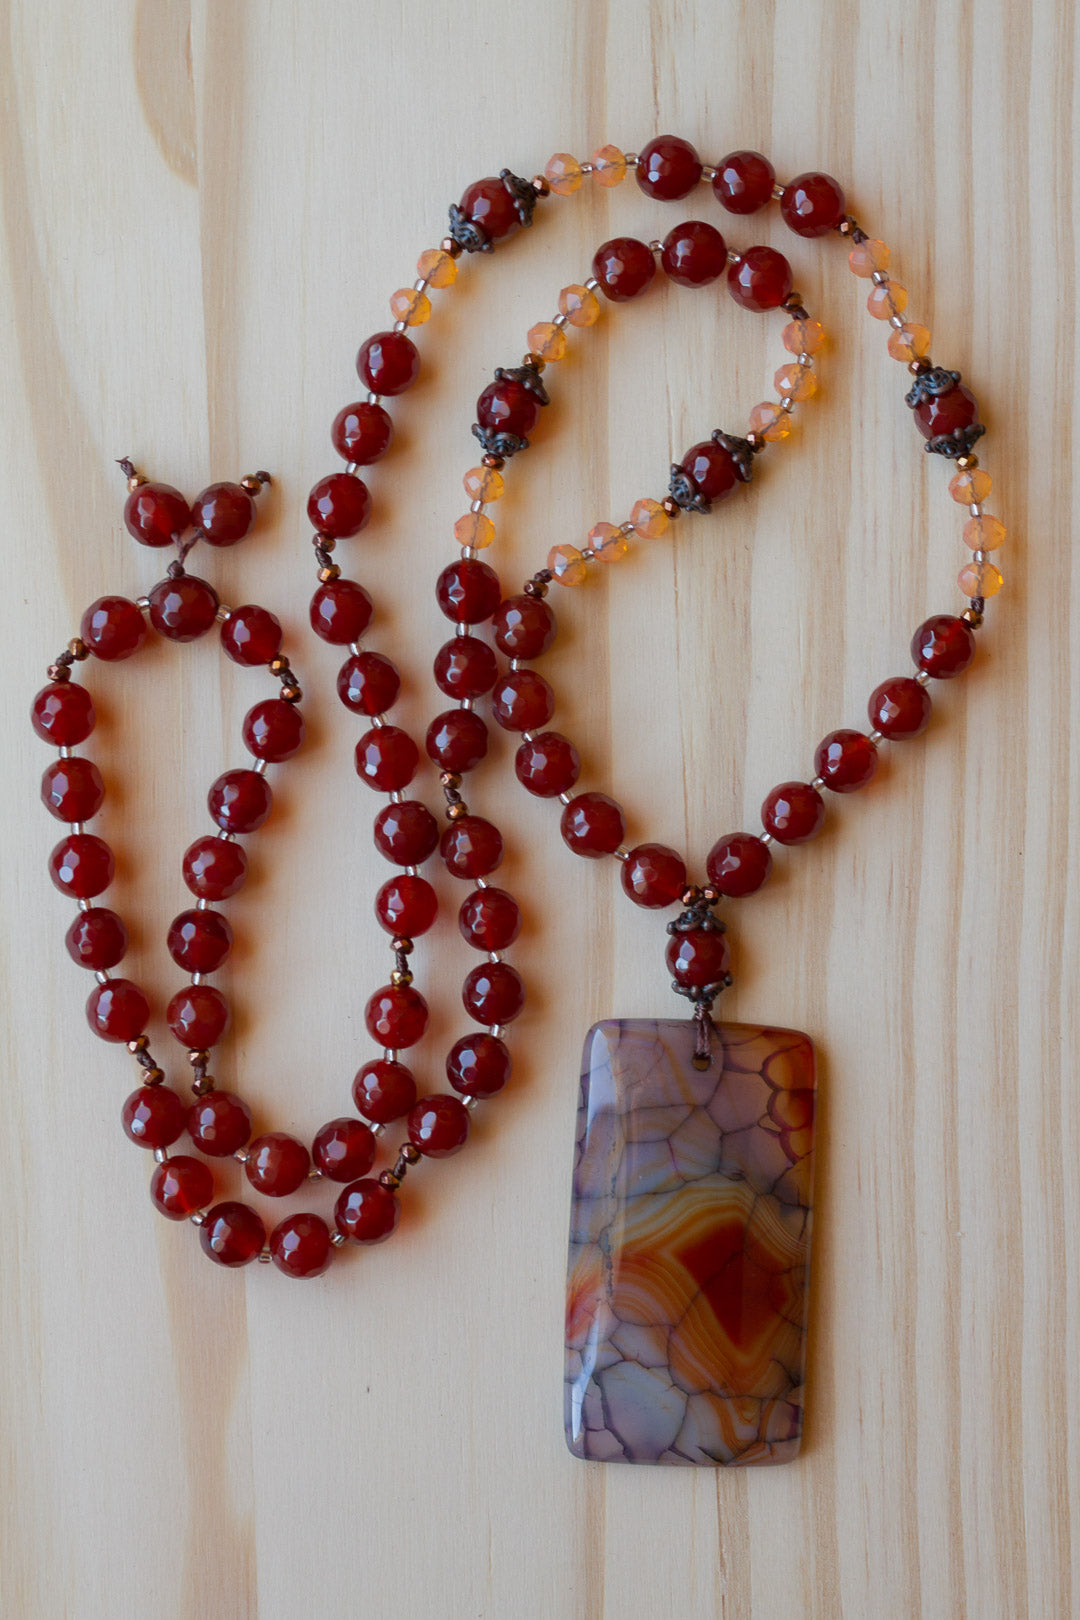 30" Dragon Vein Agate Beaded Pendant Necklace with Red Agate & Peach Crystal Beads